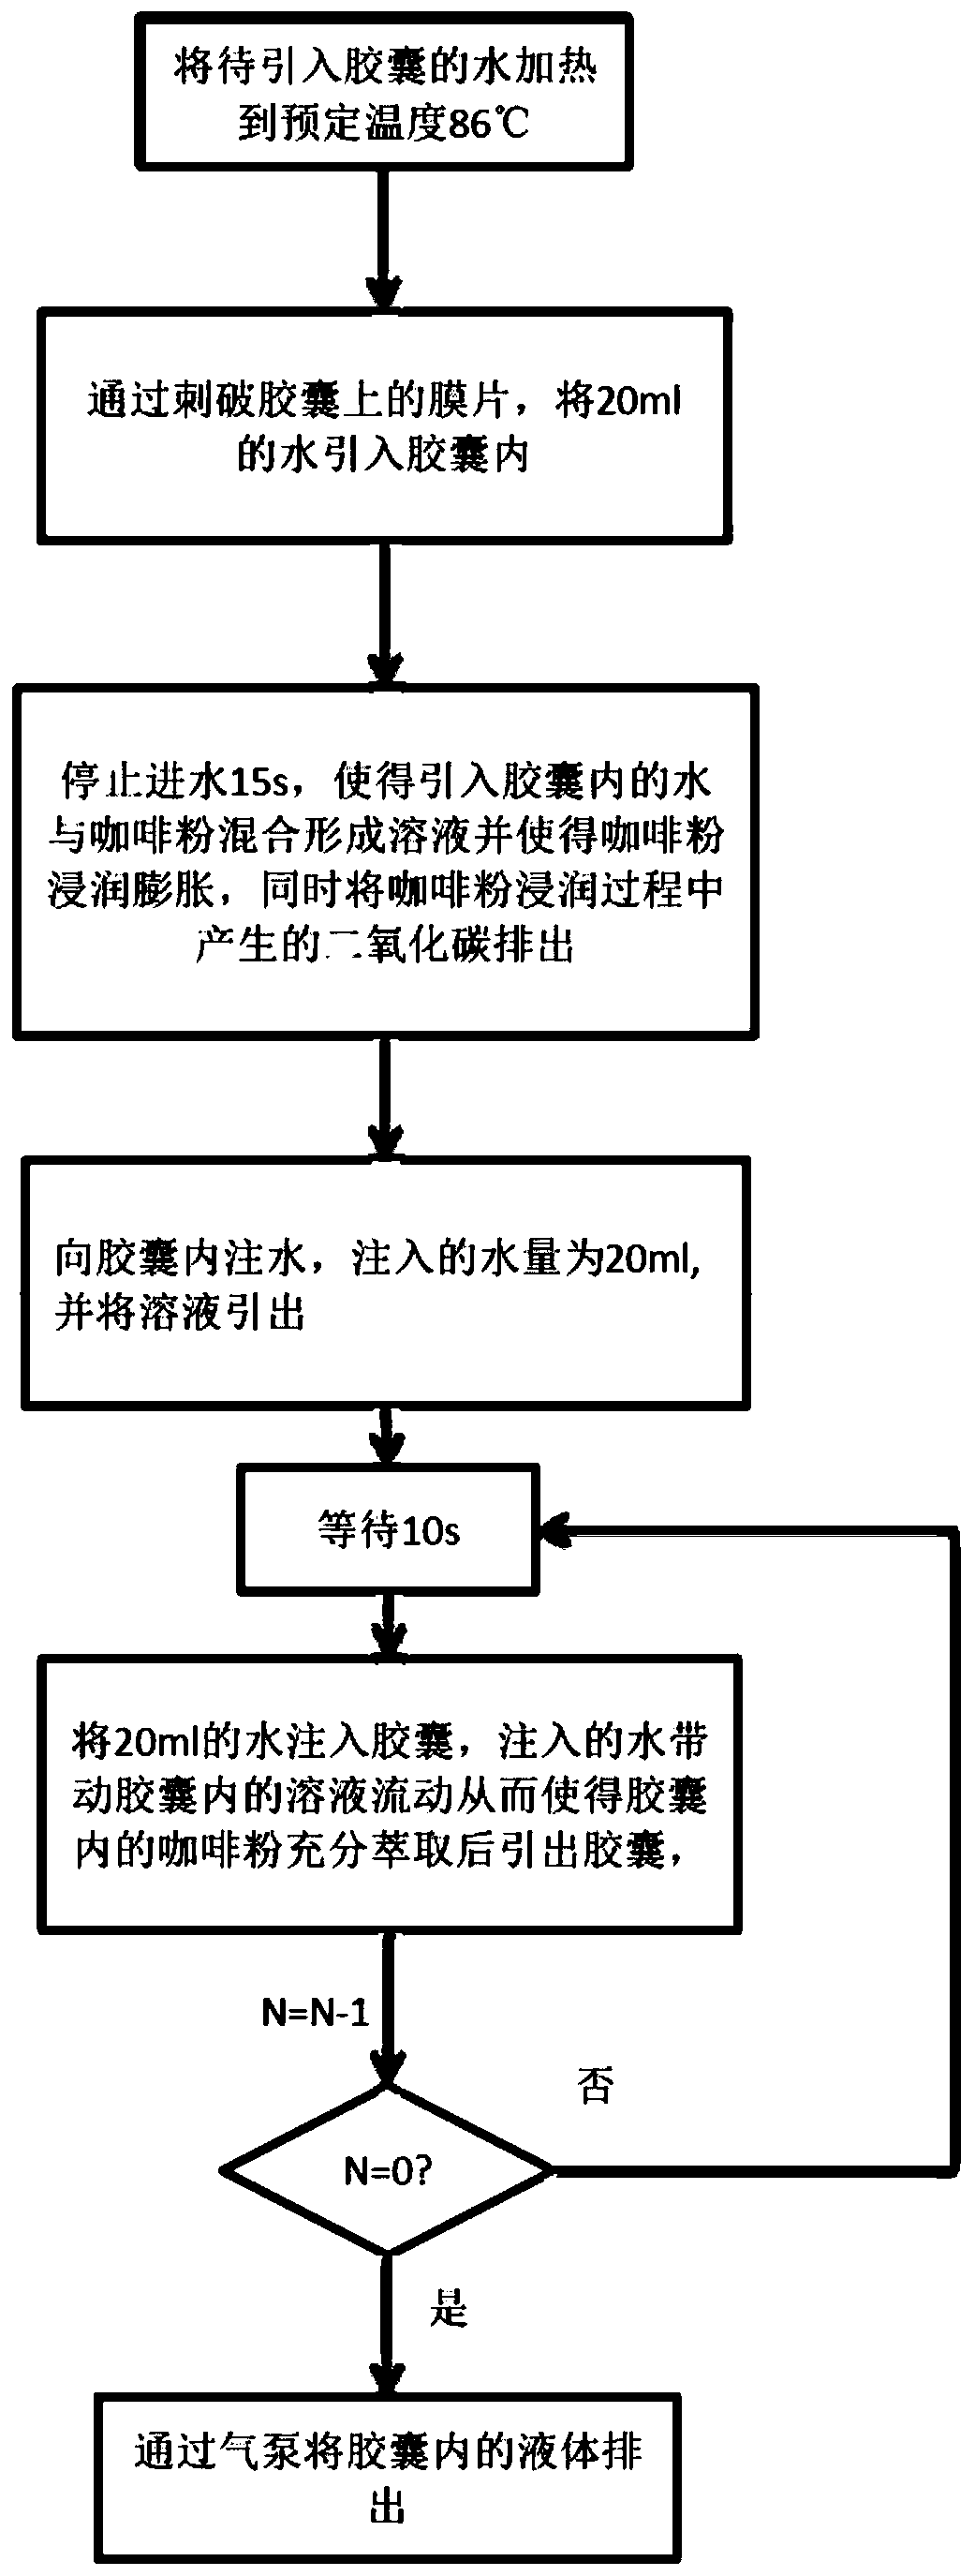 Method for preparing hand-brewed coffee by capsule coffee machine and capsule coffee machine